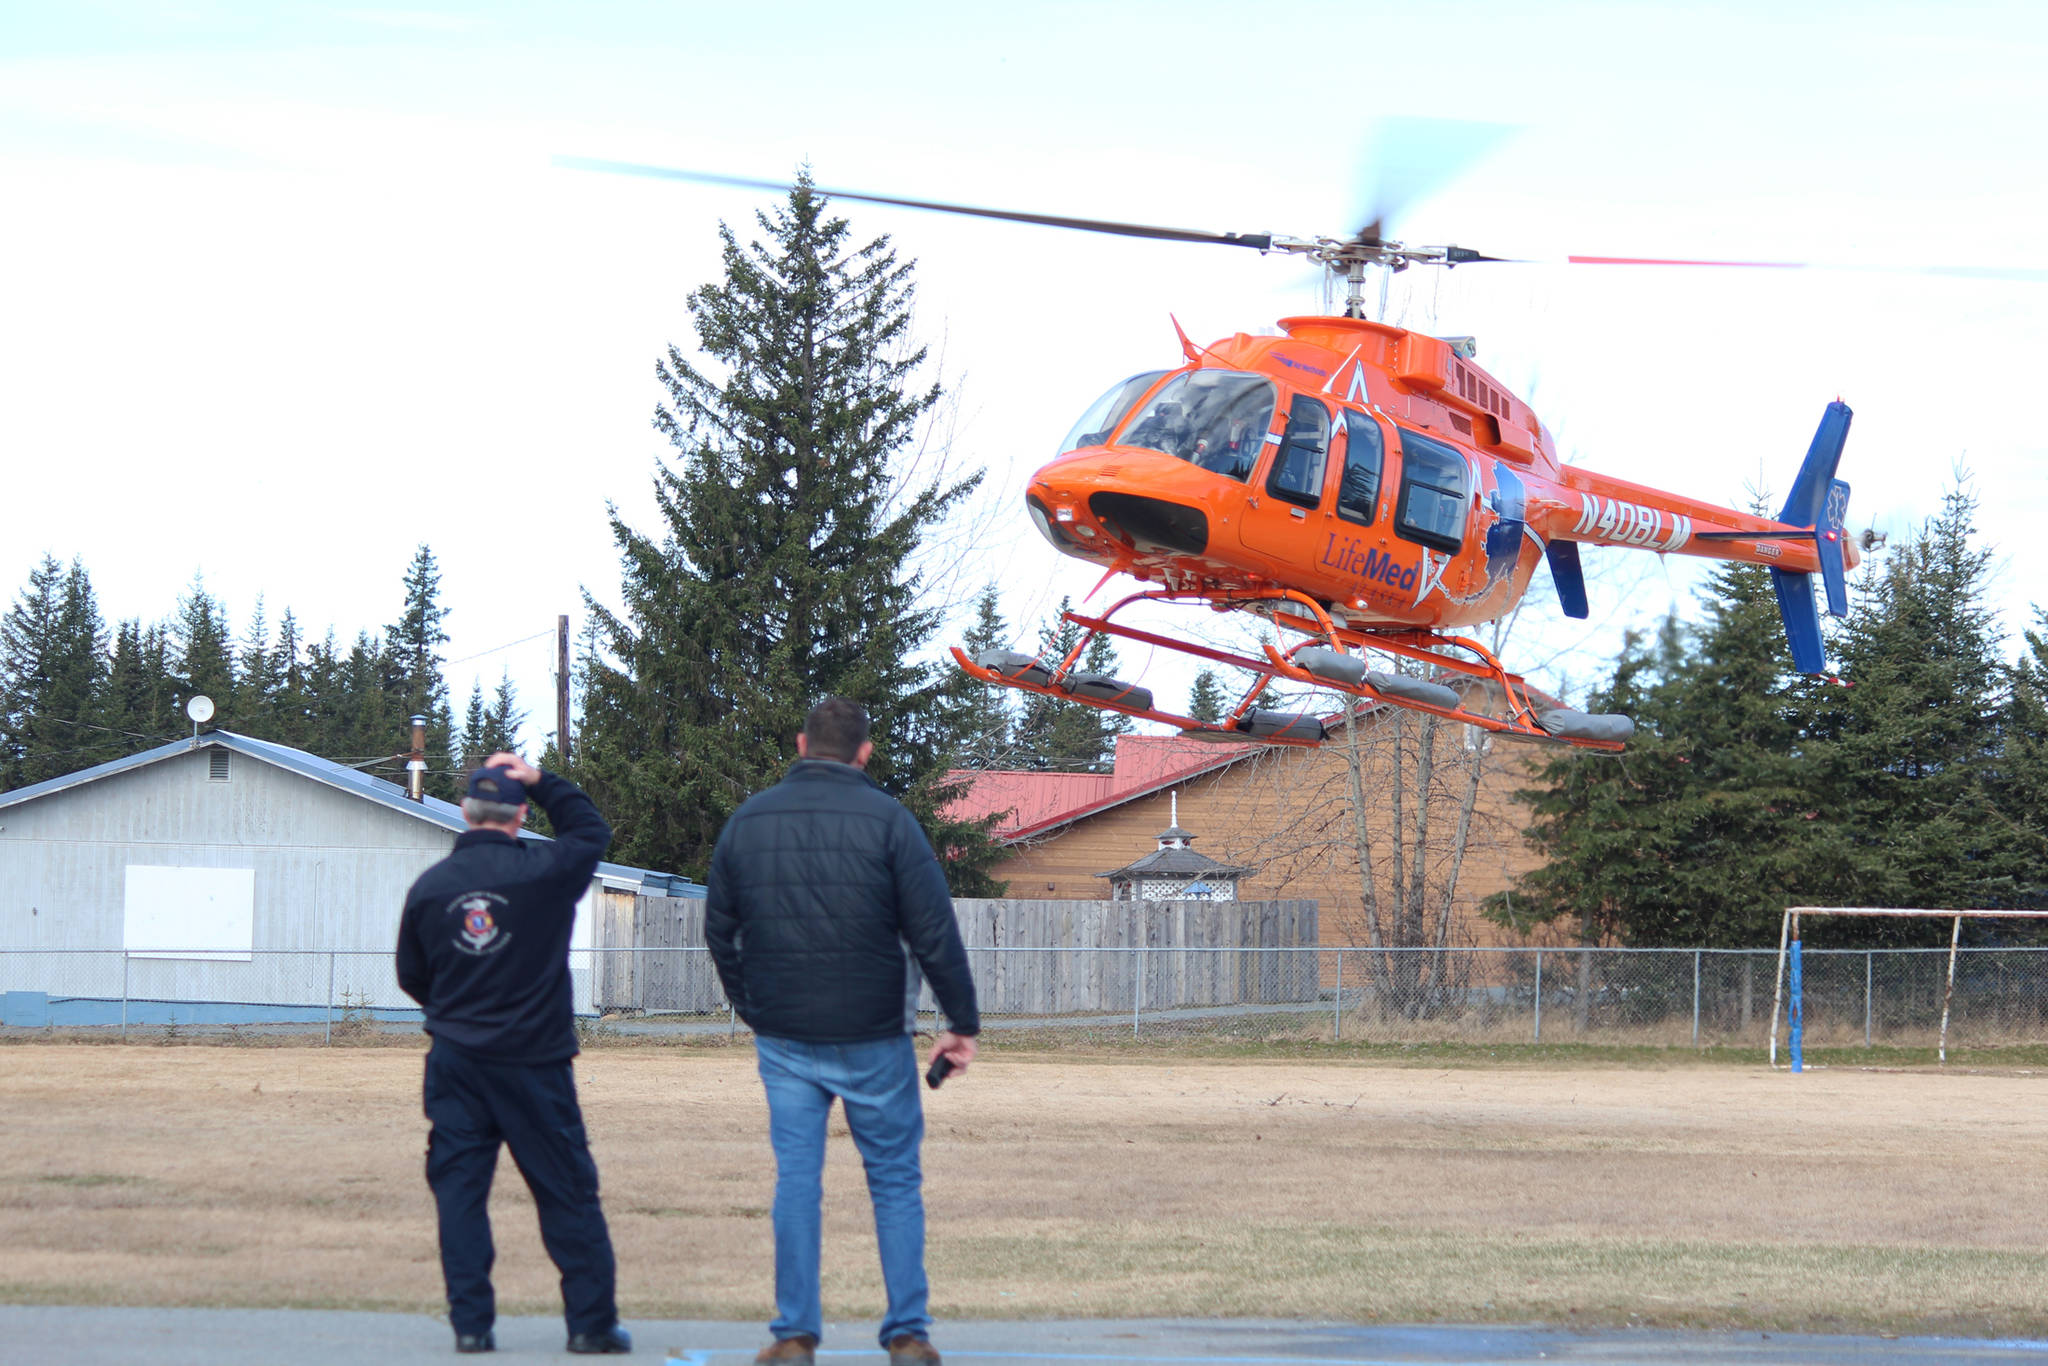 &lt;span class="neFMT neFMT_PhotoCredit"&gt;Photo by Megan Pacer/Homer News&lt;/span&gt;                                A LifeMed helicopter based out of Soldotna lands in front of Anchor Point Emergency Services Chief Al Terry (left) and Chapman School Principal Conrad Woodhead (right) on Friday, May 11 behind the school in Anchor Point. Woodhead and Terry contacted LifeMed to organize a demonstration for students.